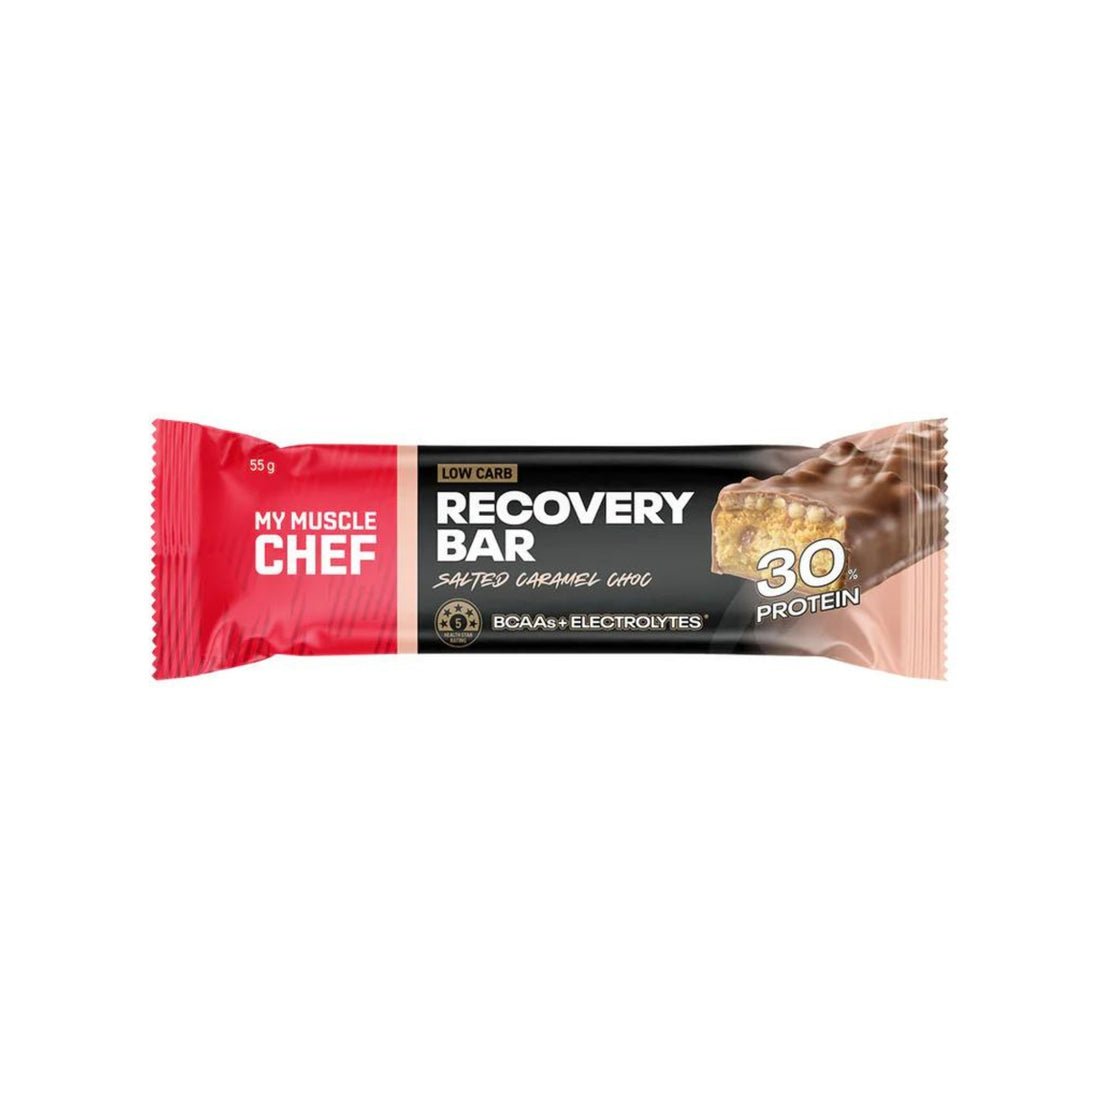 My Muscle Chef Recovery Bar - Salted Carmel Choc